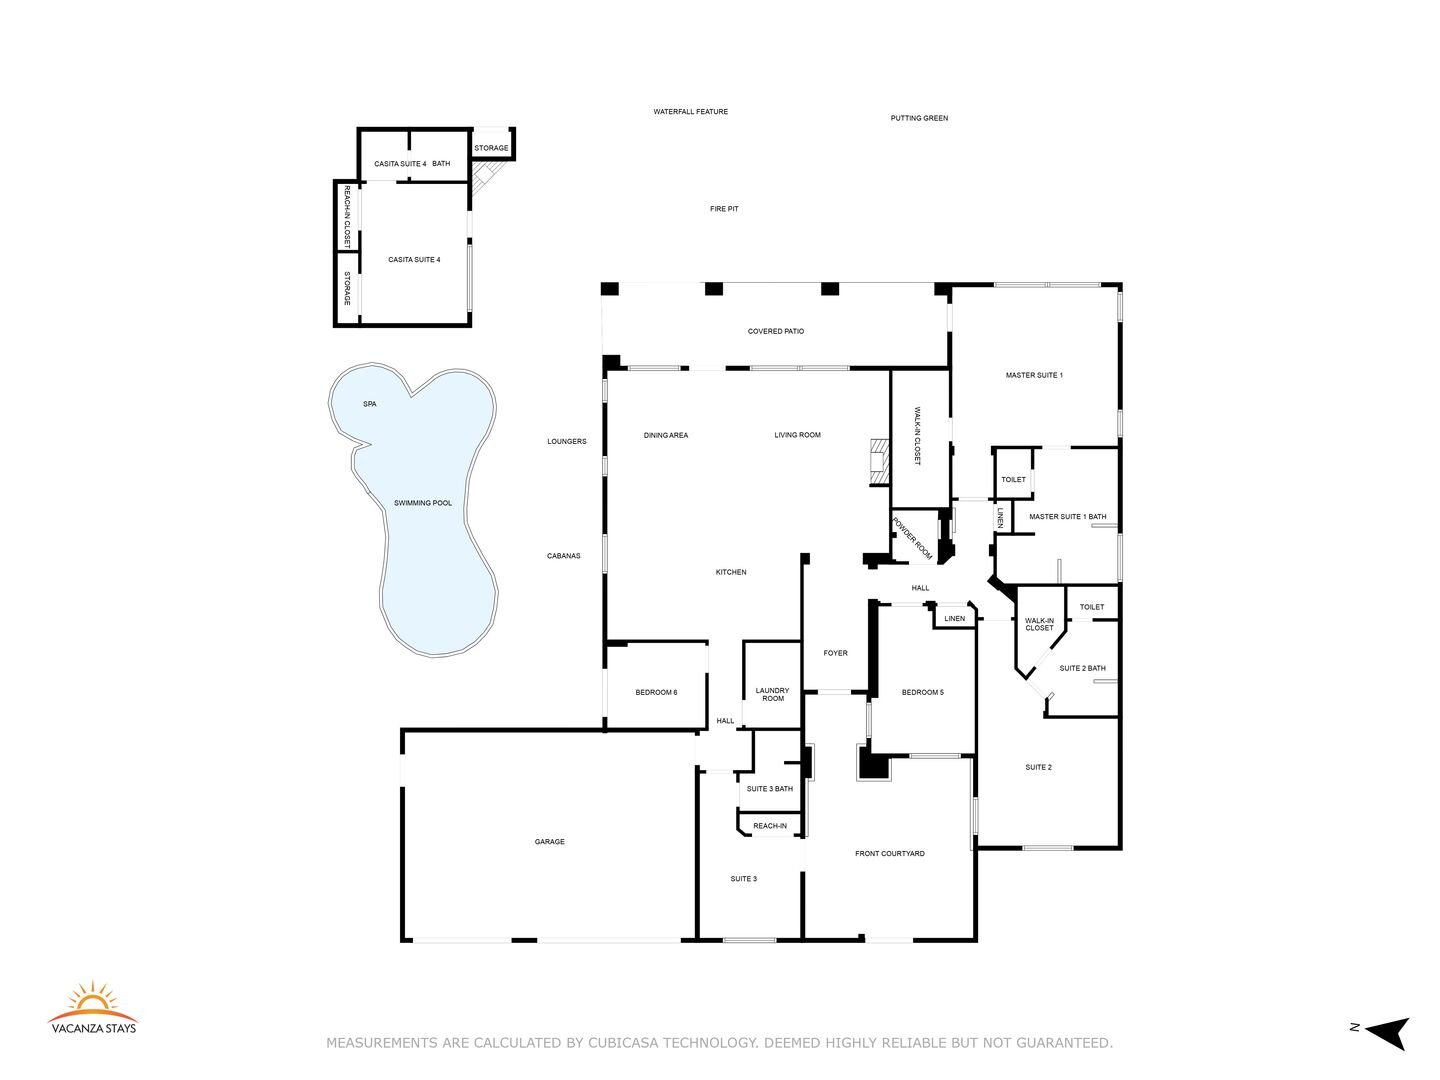 Contact us if you'd like the full floor plan of home!